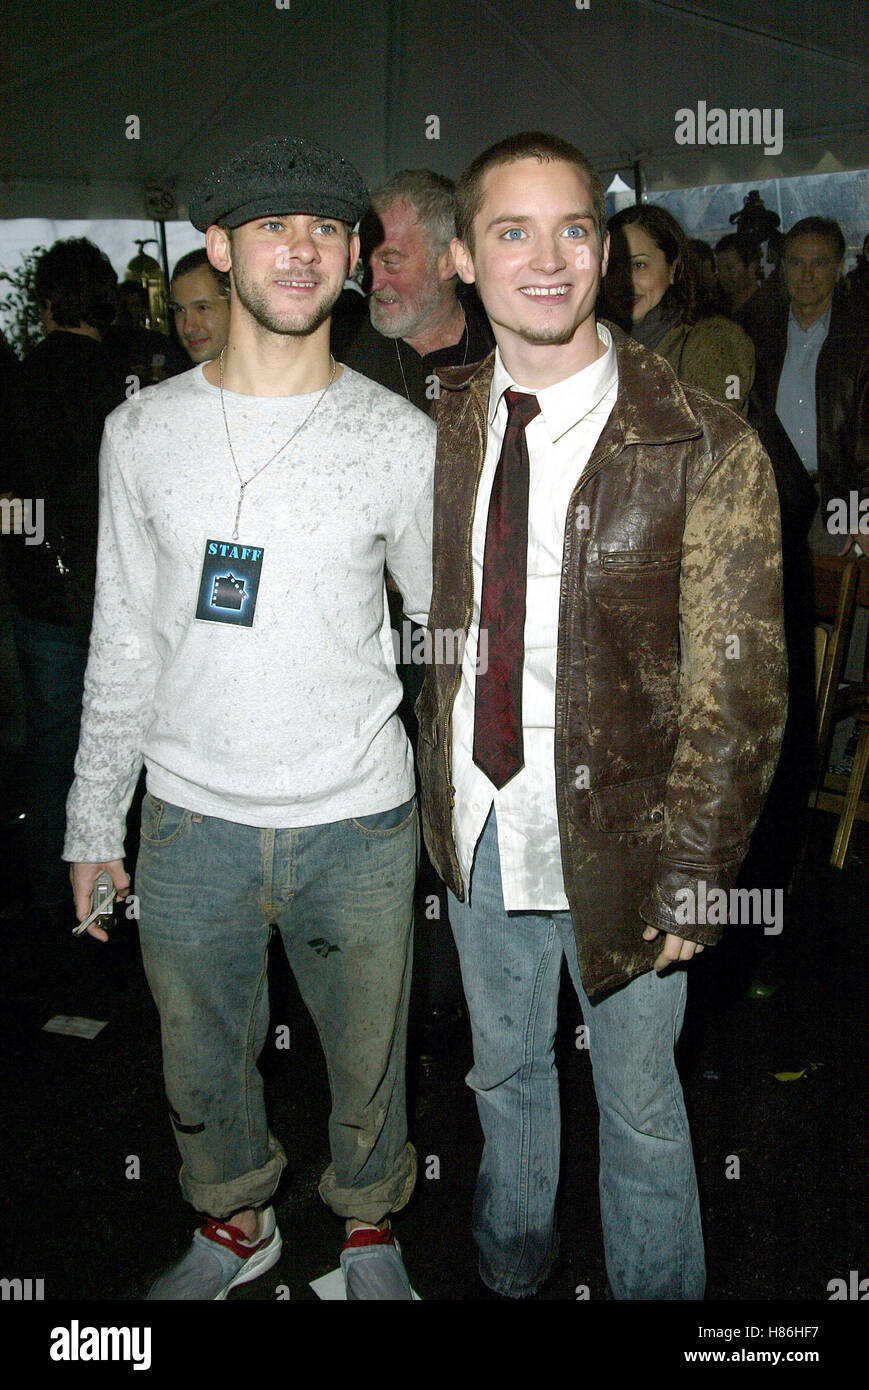 DOMINIC MONAGHAN & ELIJAH WOOD LORD OF THE RINGS. AIR NZ LAX LOS ANGELES  USA 16 December 2002 Stock Photo - Alamy